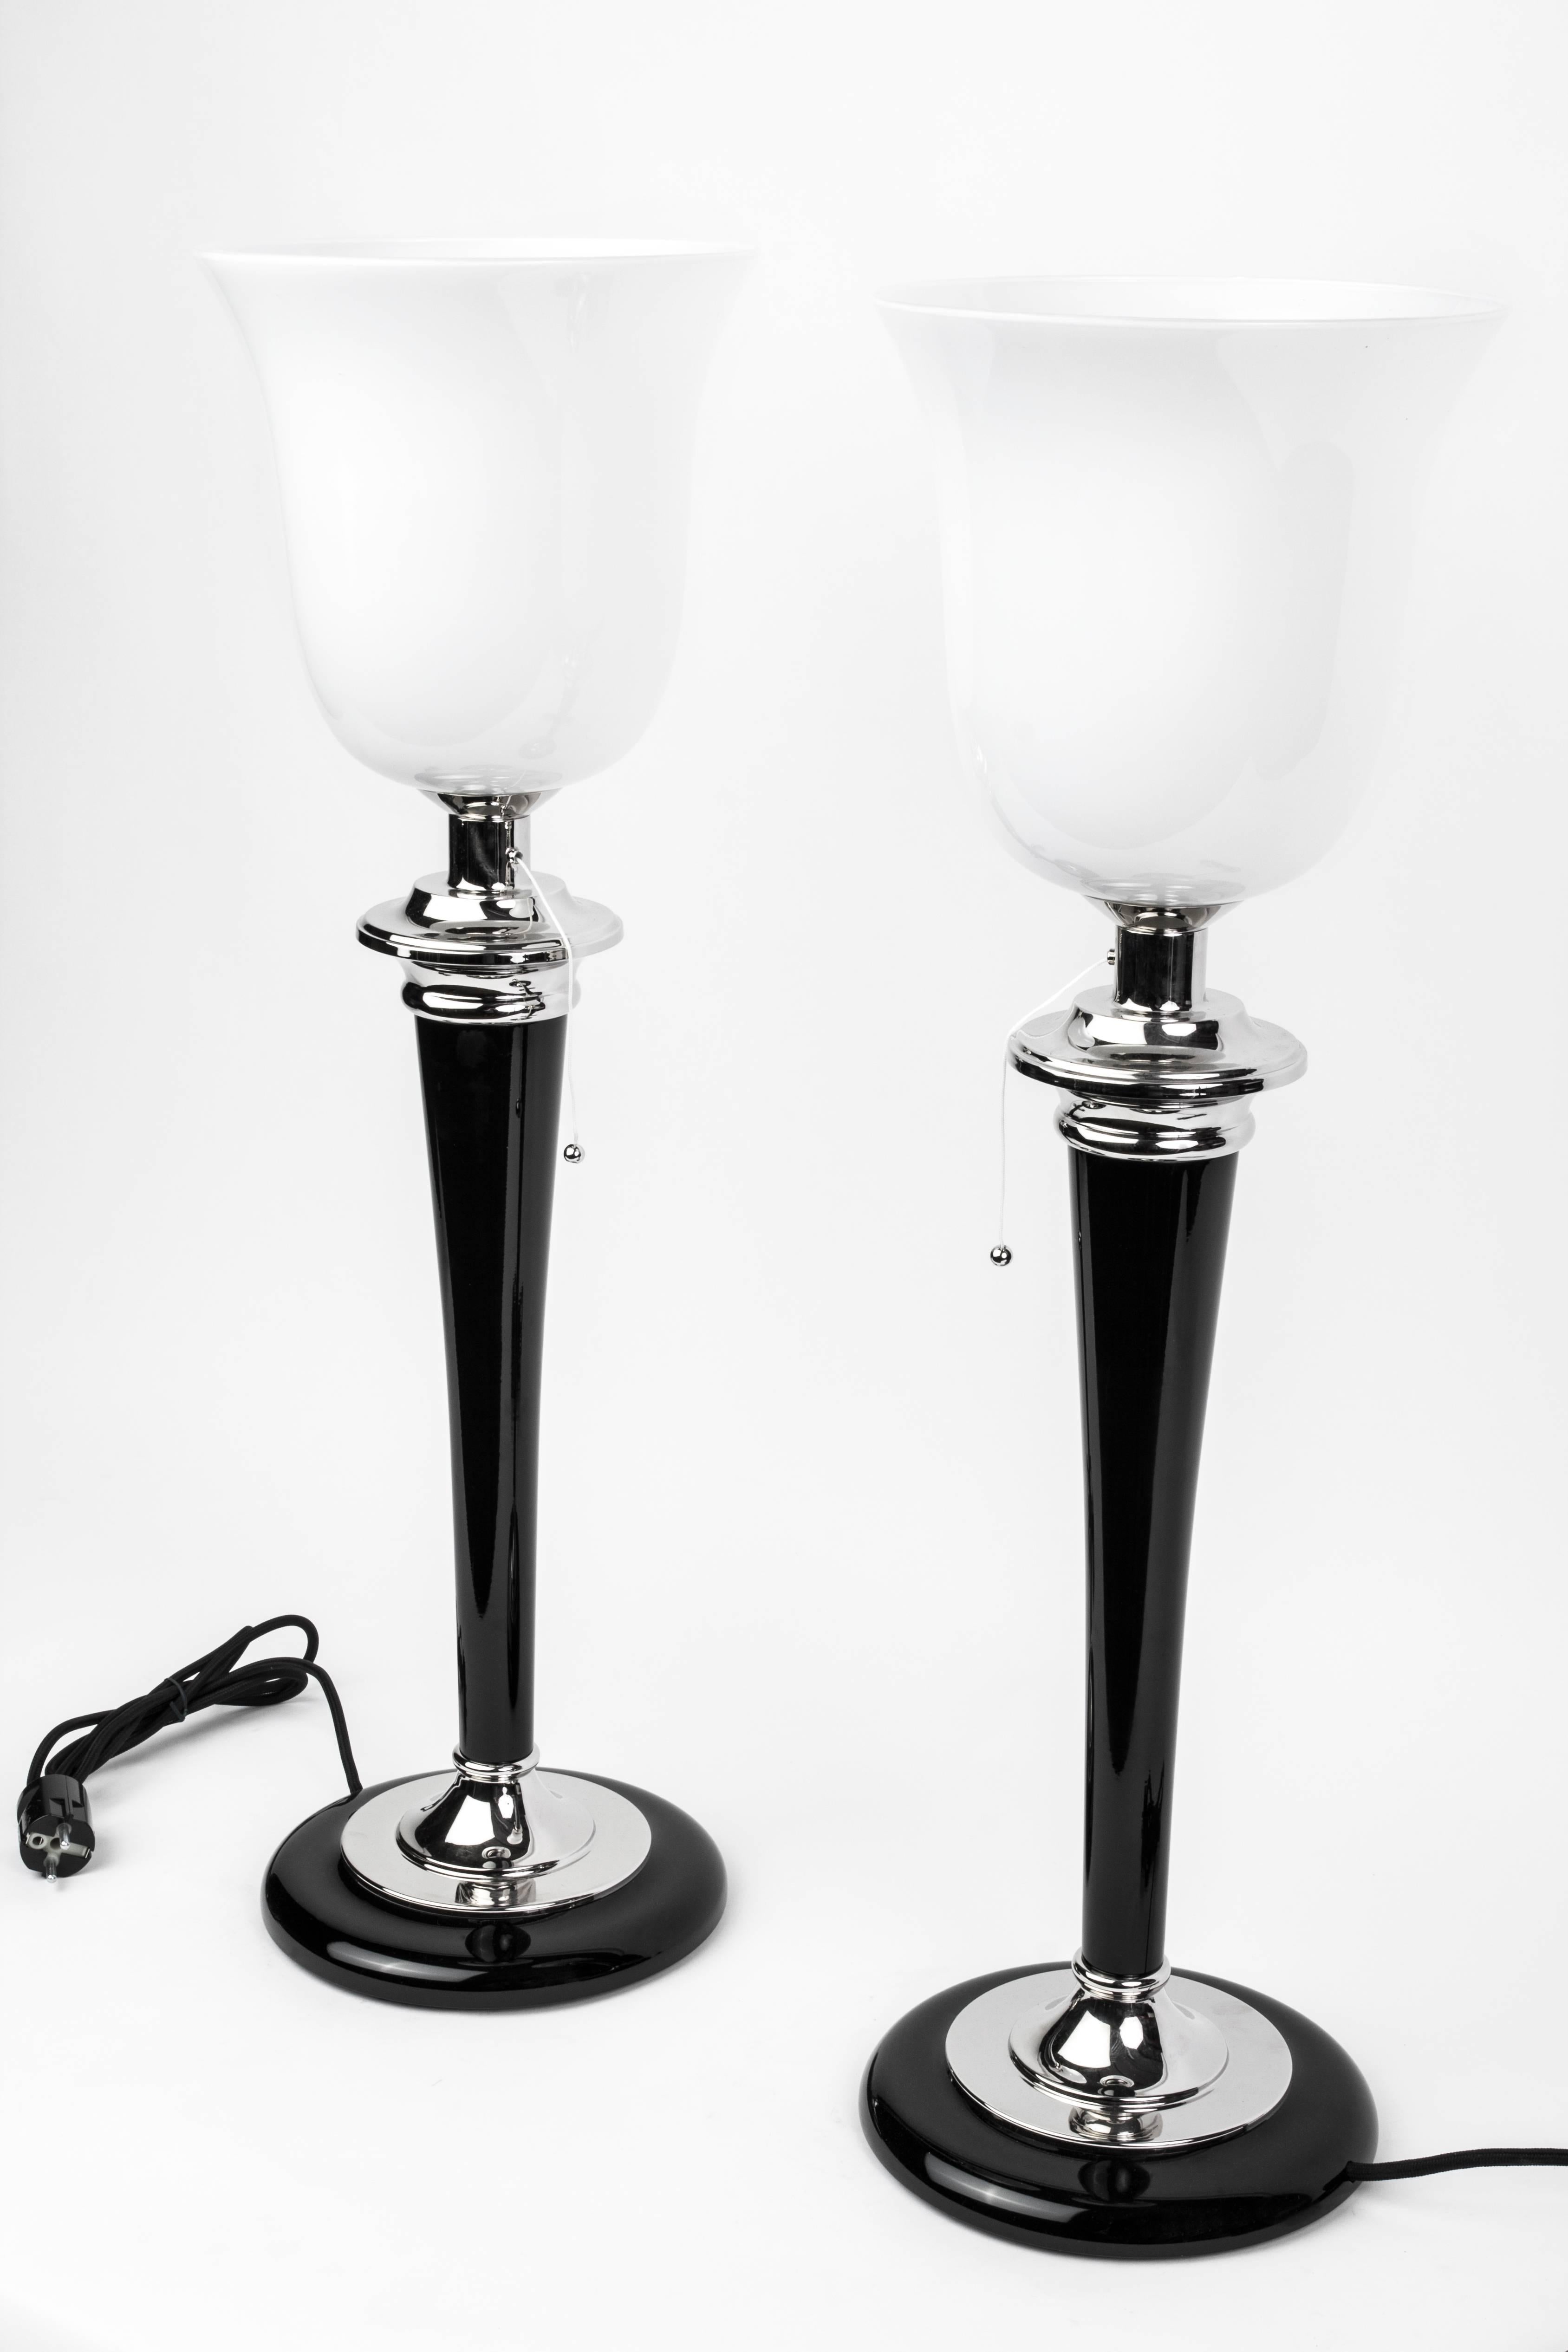 This beautiful pair of Art Deco style table lamps were designed by Mazda. They feature an opaque glass shade with chrome detailing, finished in a high gloss black lacquer.

Made in Germany modern.